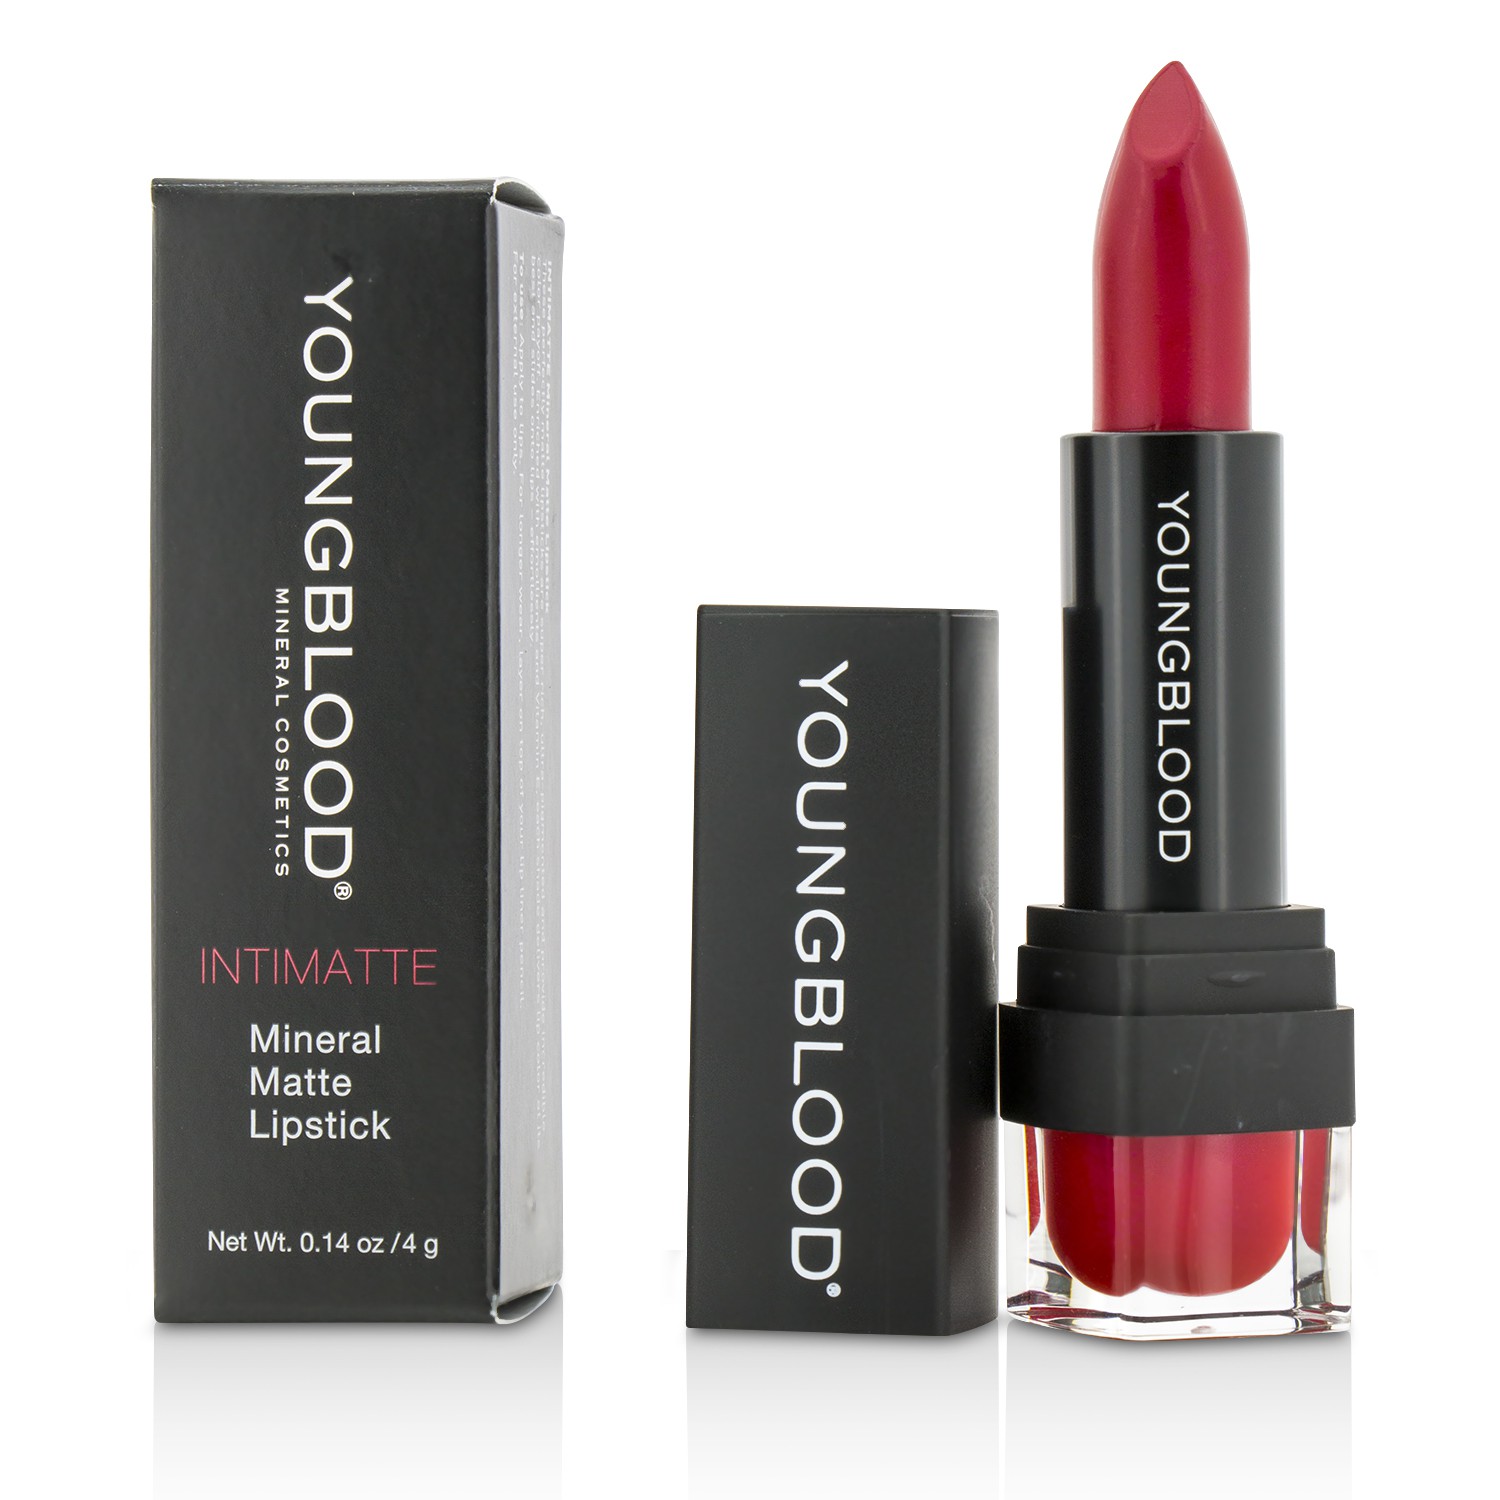 Intimatte Mineral Matte Lipstick - #Sinful Youngblood Image